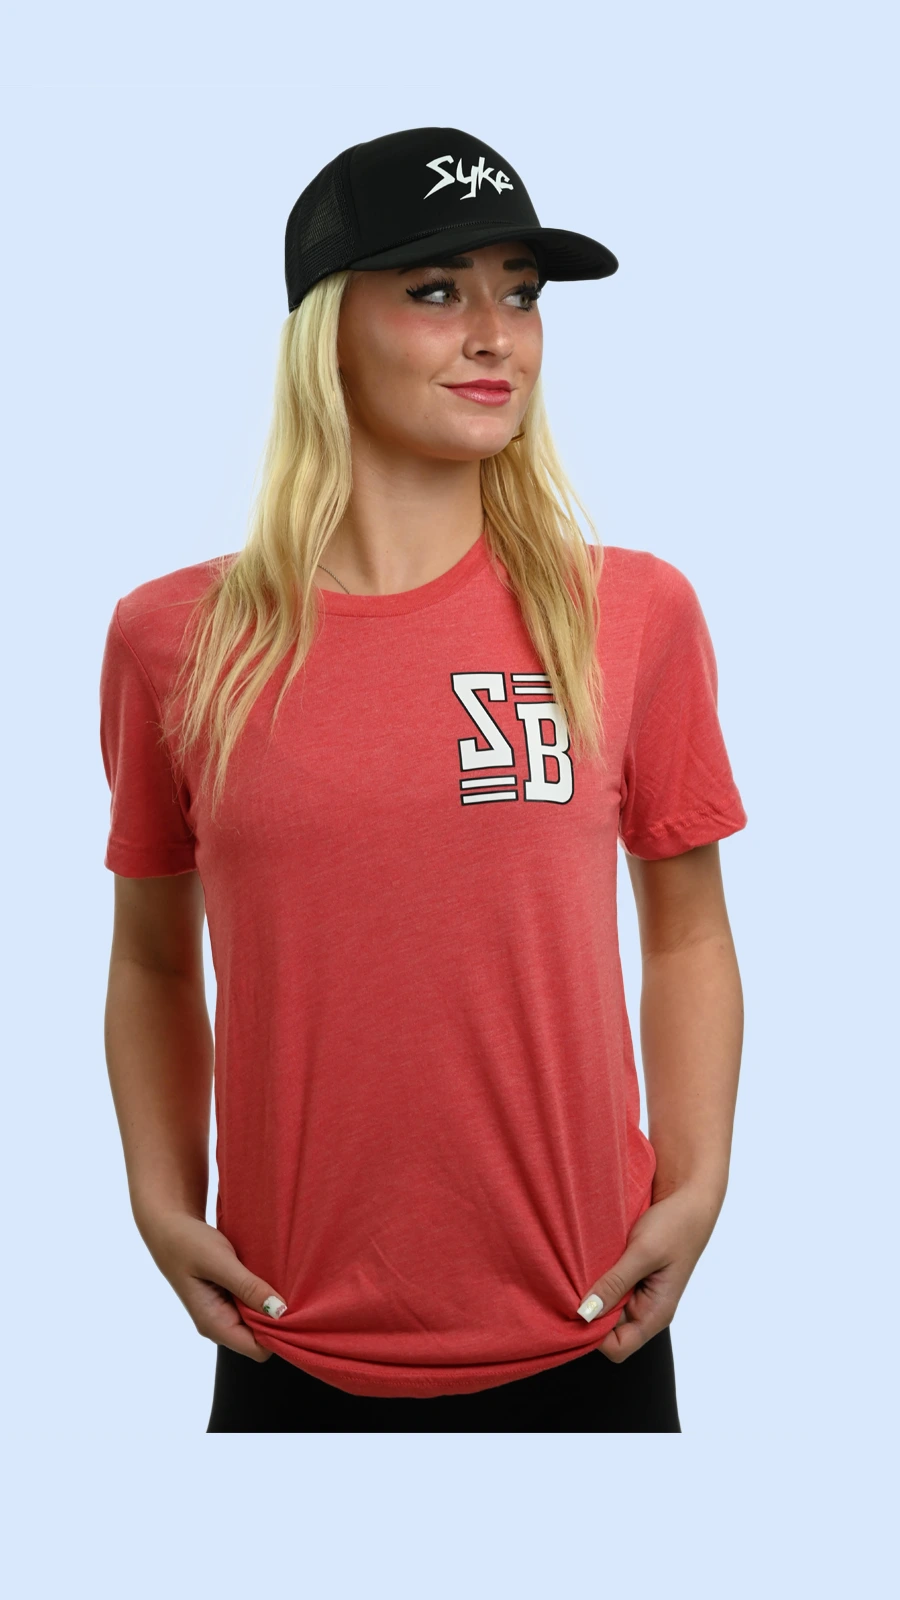 SYKE Never Stop KC tshirts for women